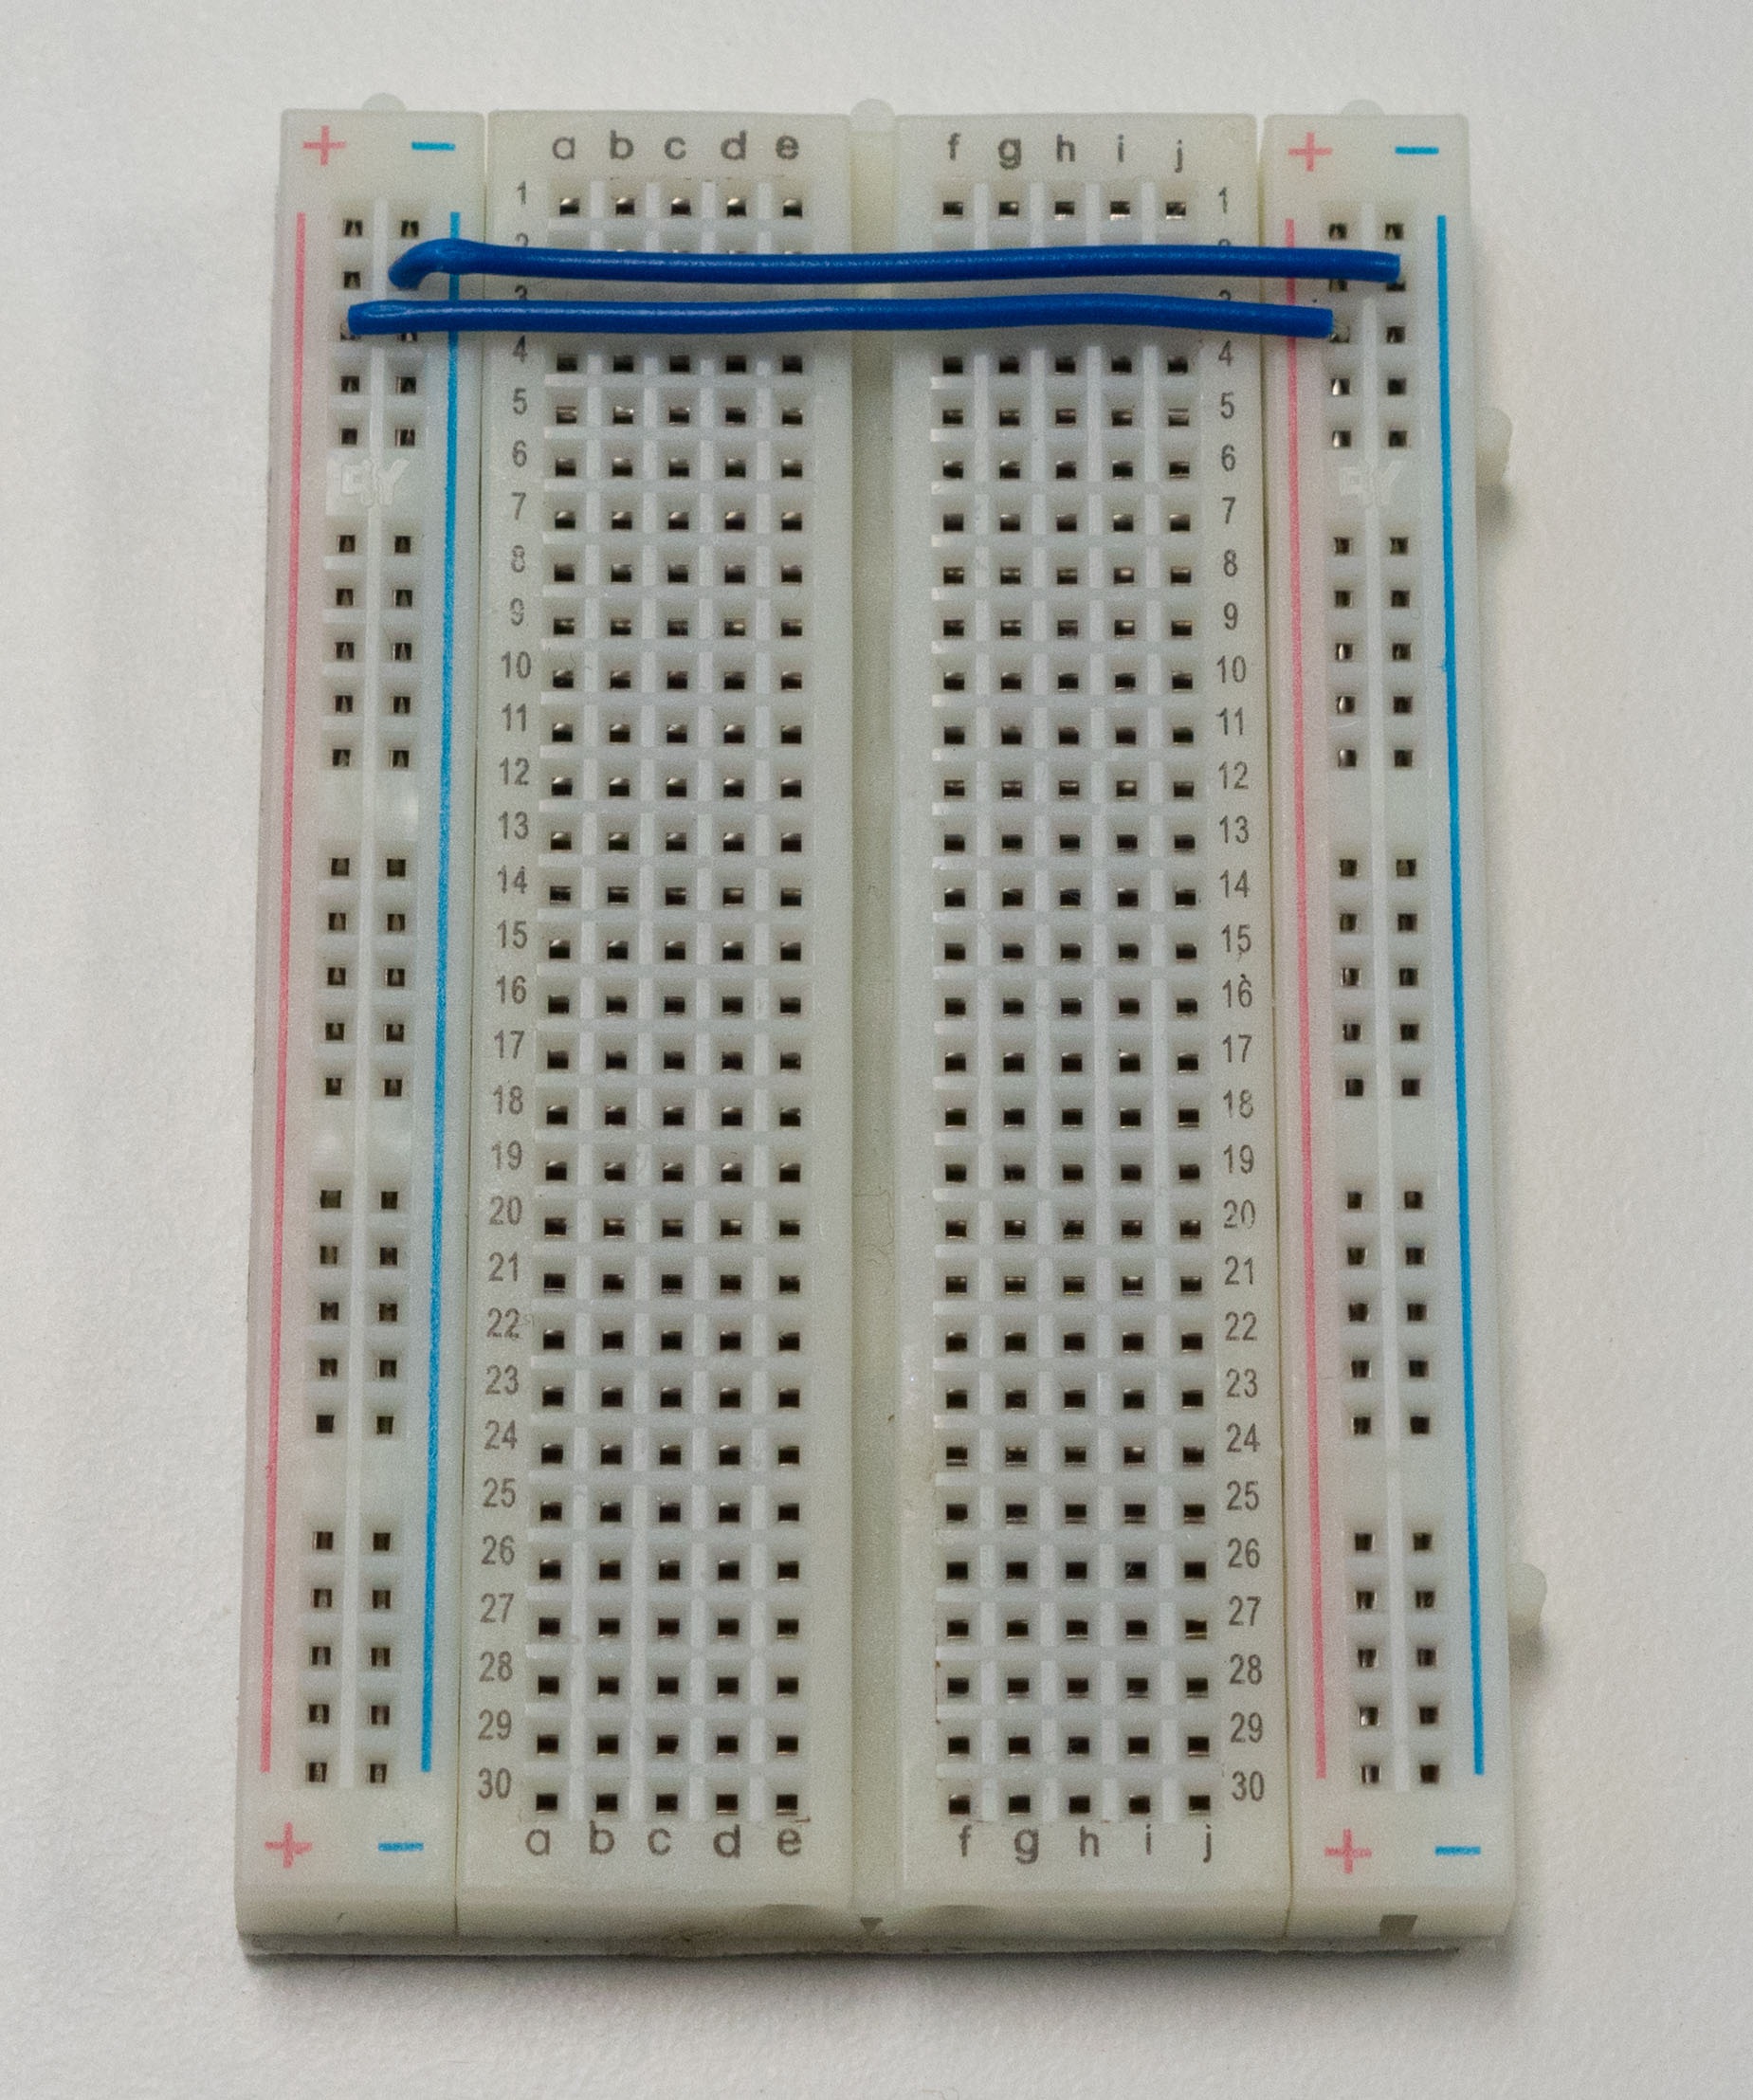 How the breadboard rails are connected together